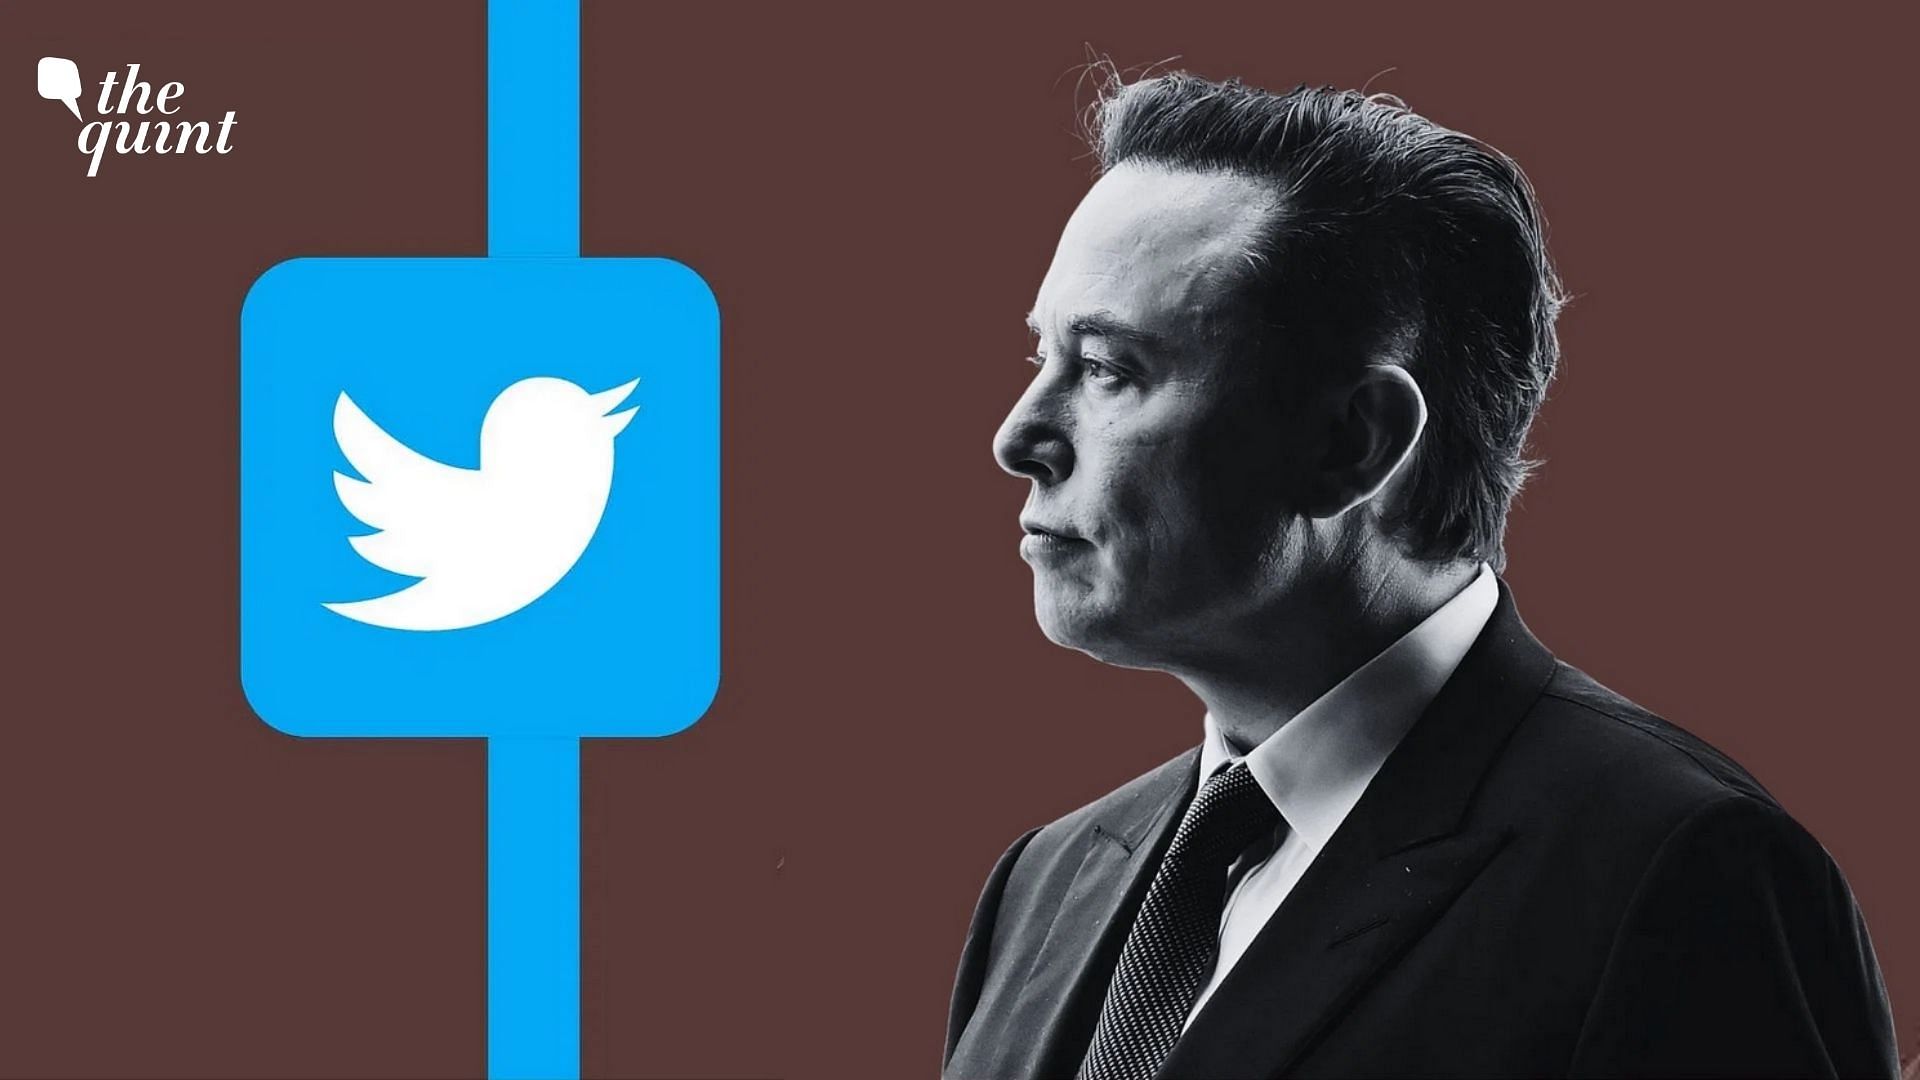 <div class="paragraphs"><p><a href="https://www.thequint.com/topic/twitter">Twitter</a> shareholders on Tuesday, 13 September, approved a $44 billion buyout deal by billionaire Elon Musk, handing over the its outcome to a court battle, with Musk trying to back out of the deal, news agency ANI reported citing Reuters<em>.</em></p></div>